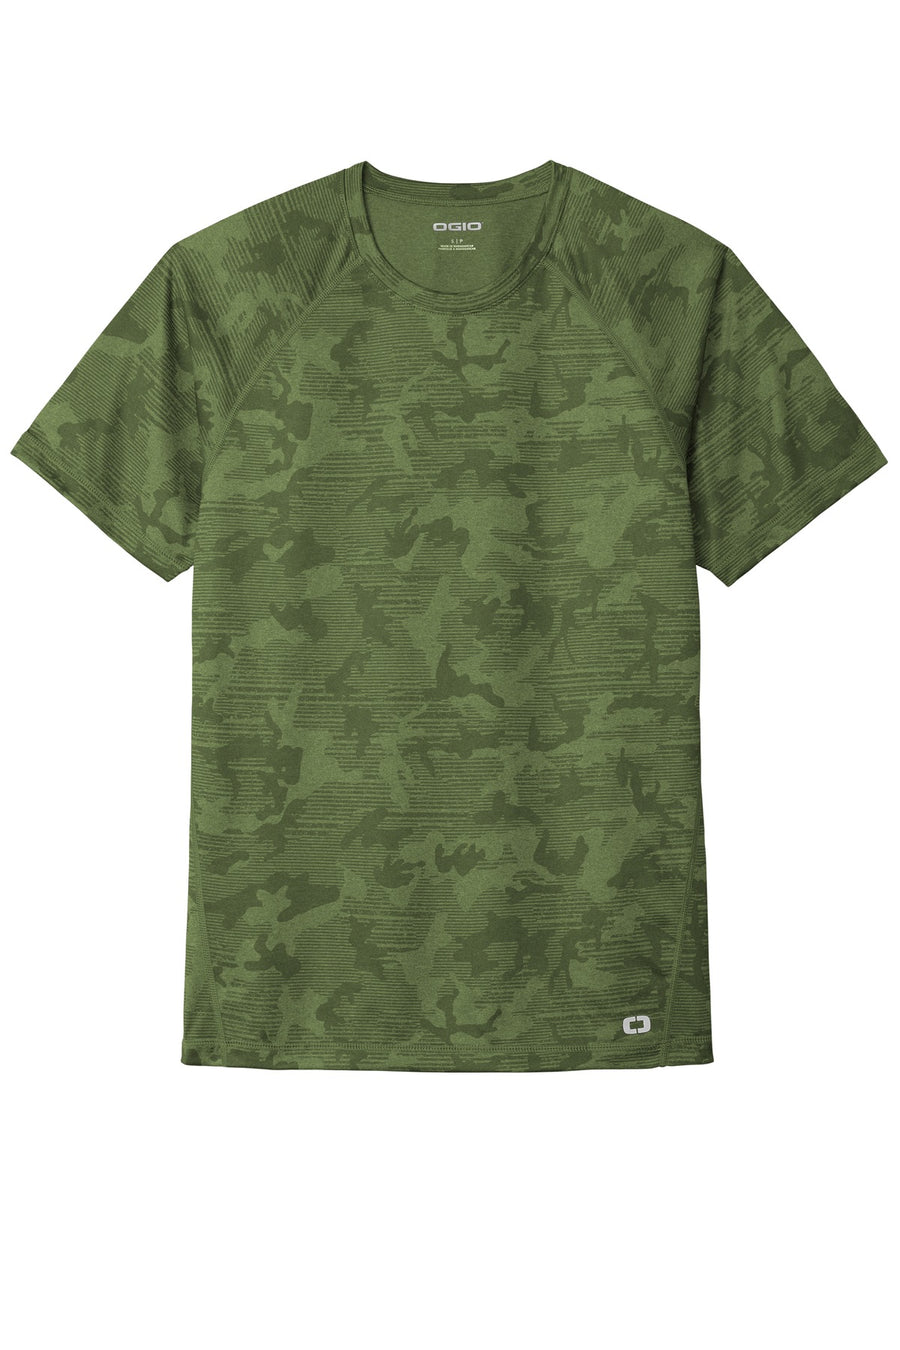 OE323-Grit Green Camo-front_flat